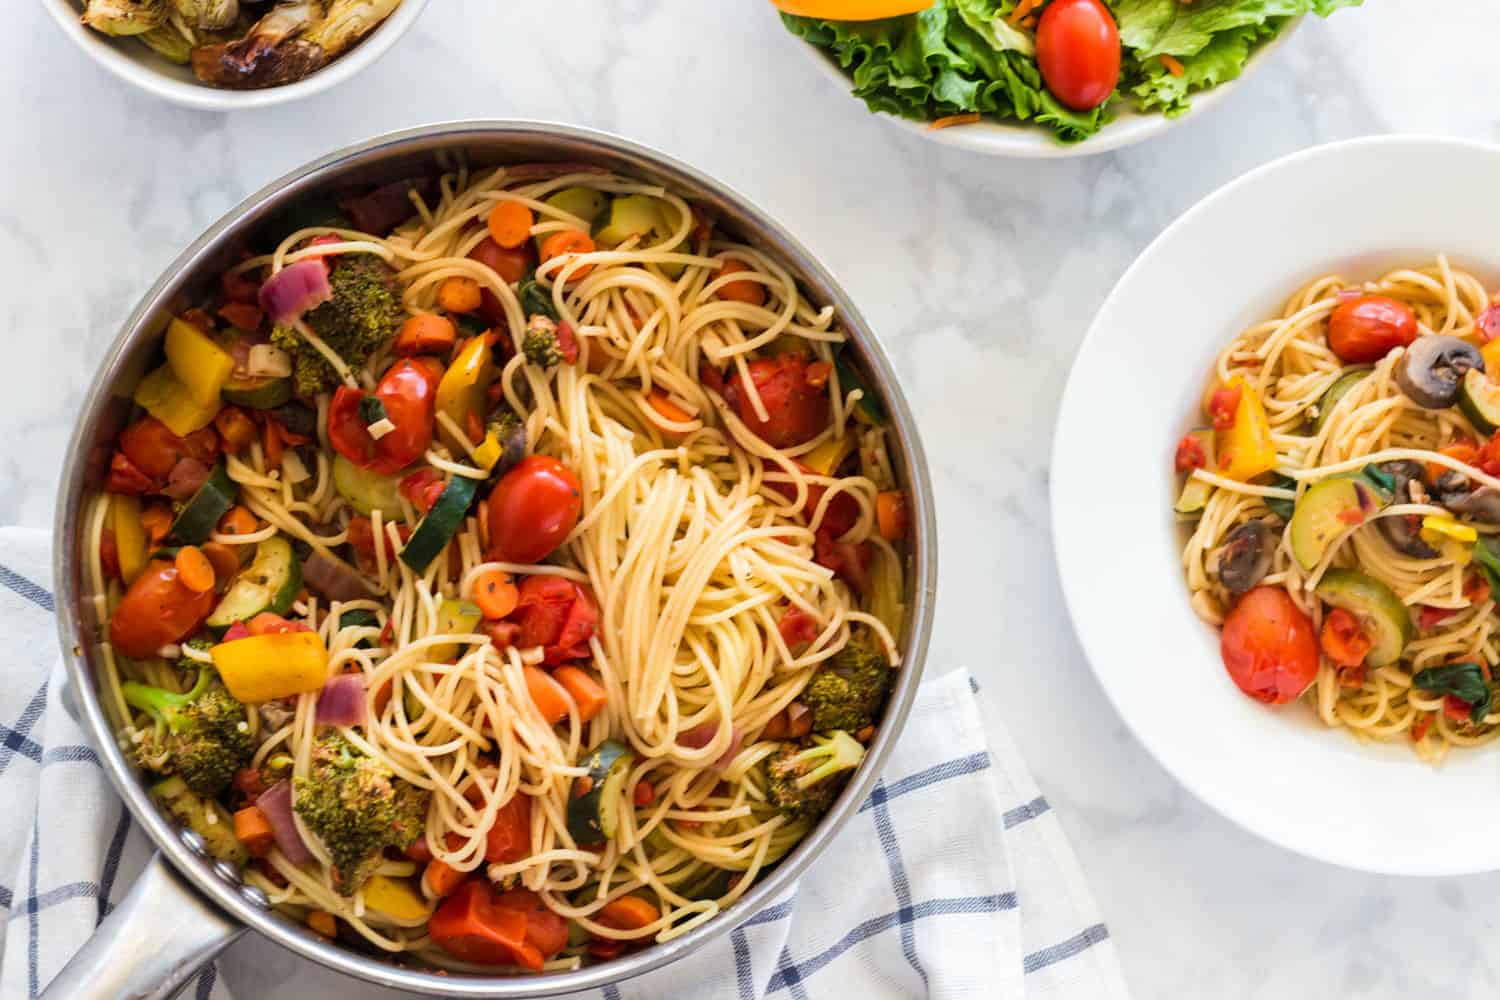 Vegetable Spaghetti is an easy plant-based recipe your family will enjoy.